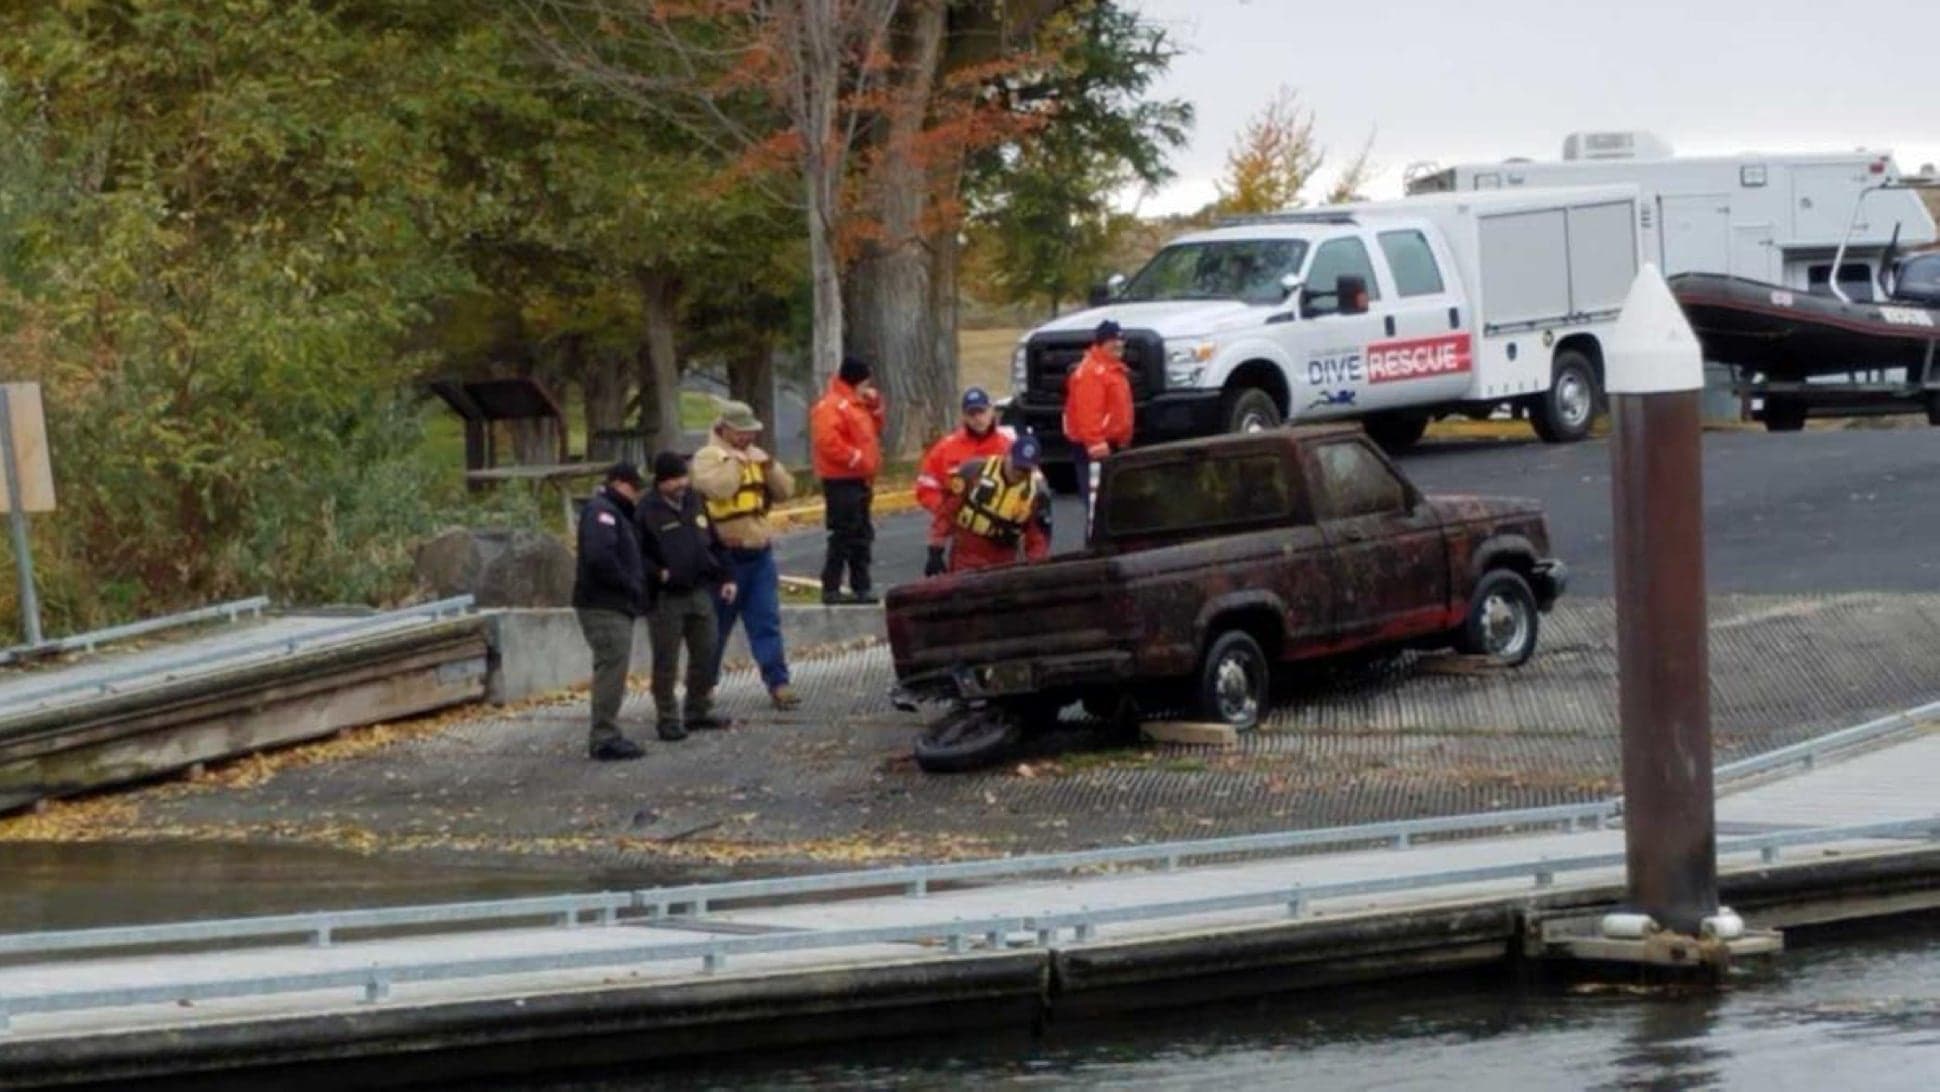 Missing Ford Ranger Pulled From Columbia River 26 Years Later With Body Remains Still Inside